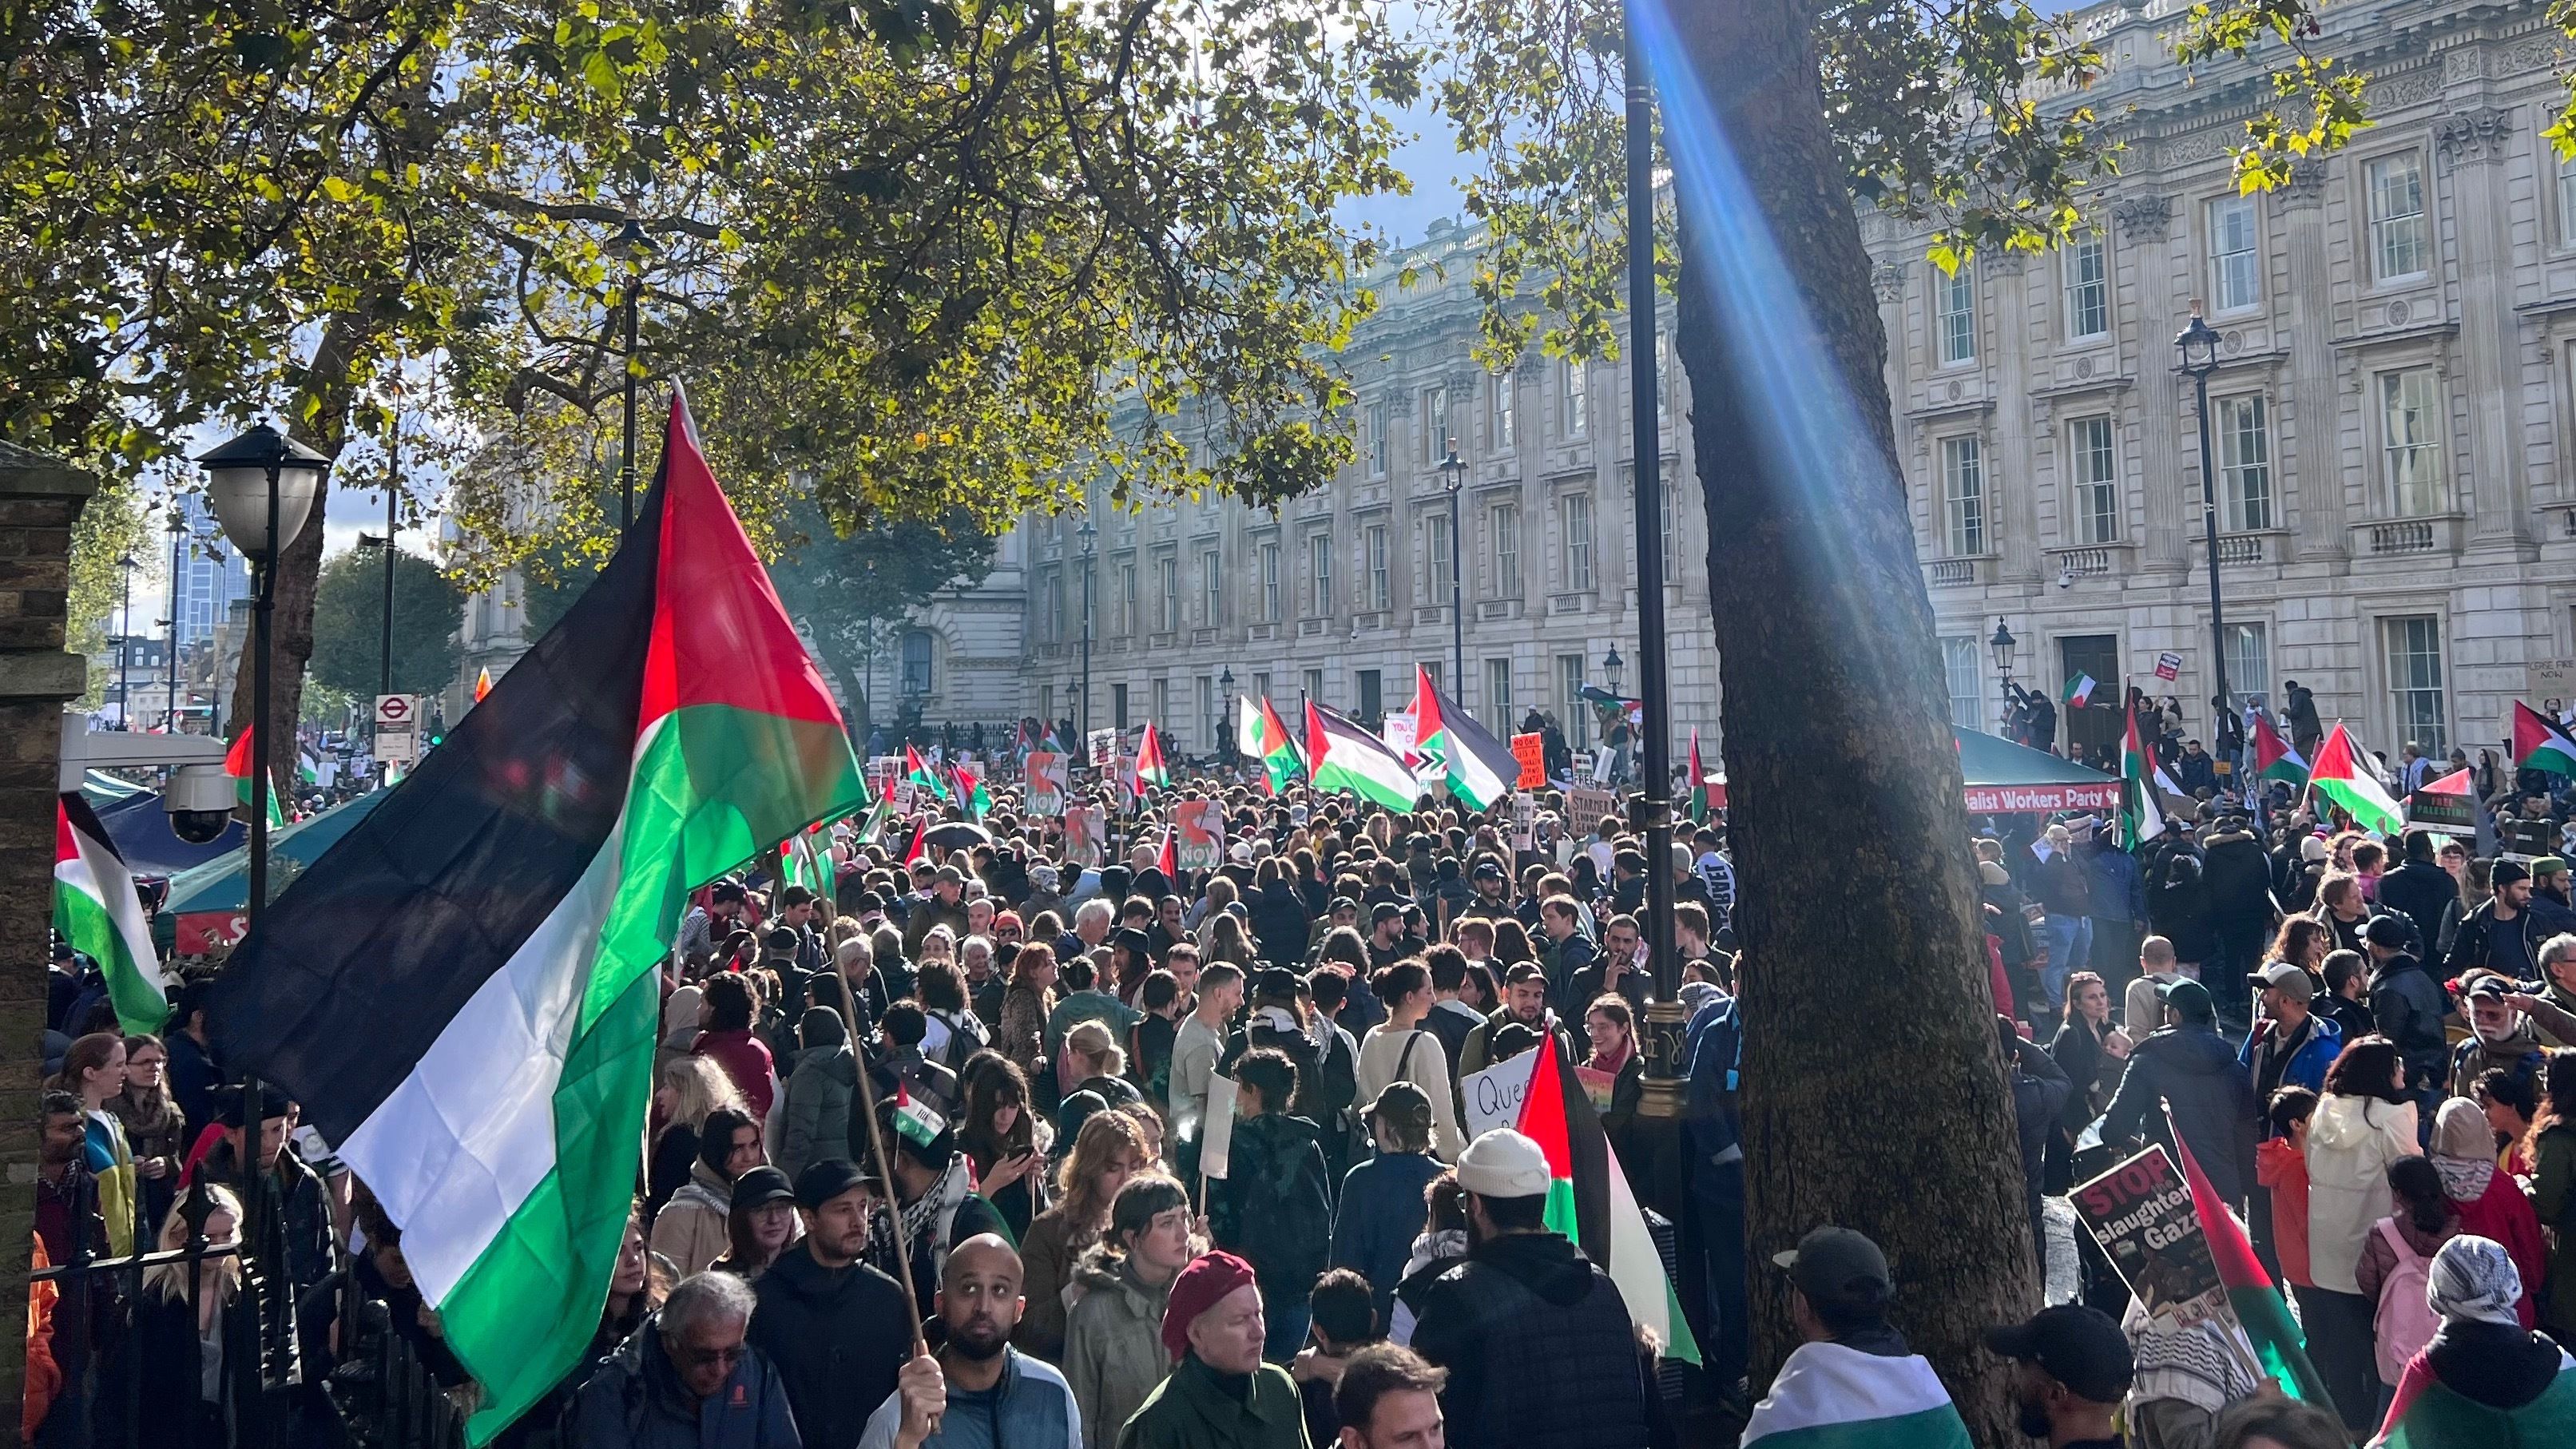 Crowds gathered in Downing Street to protest for Palestine (MEE/Areeb ULLAH)